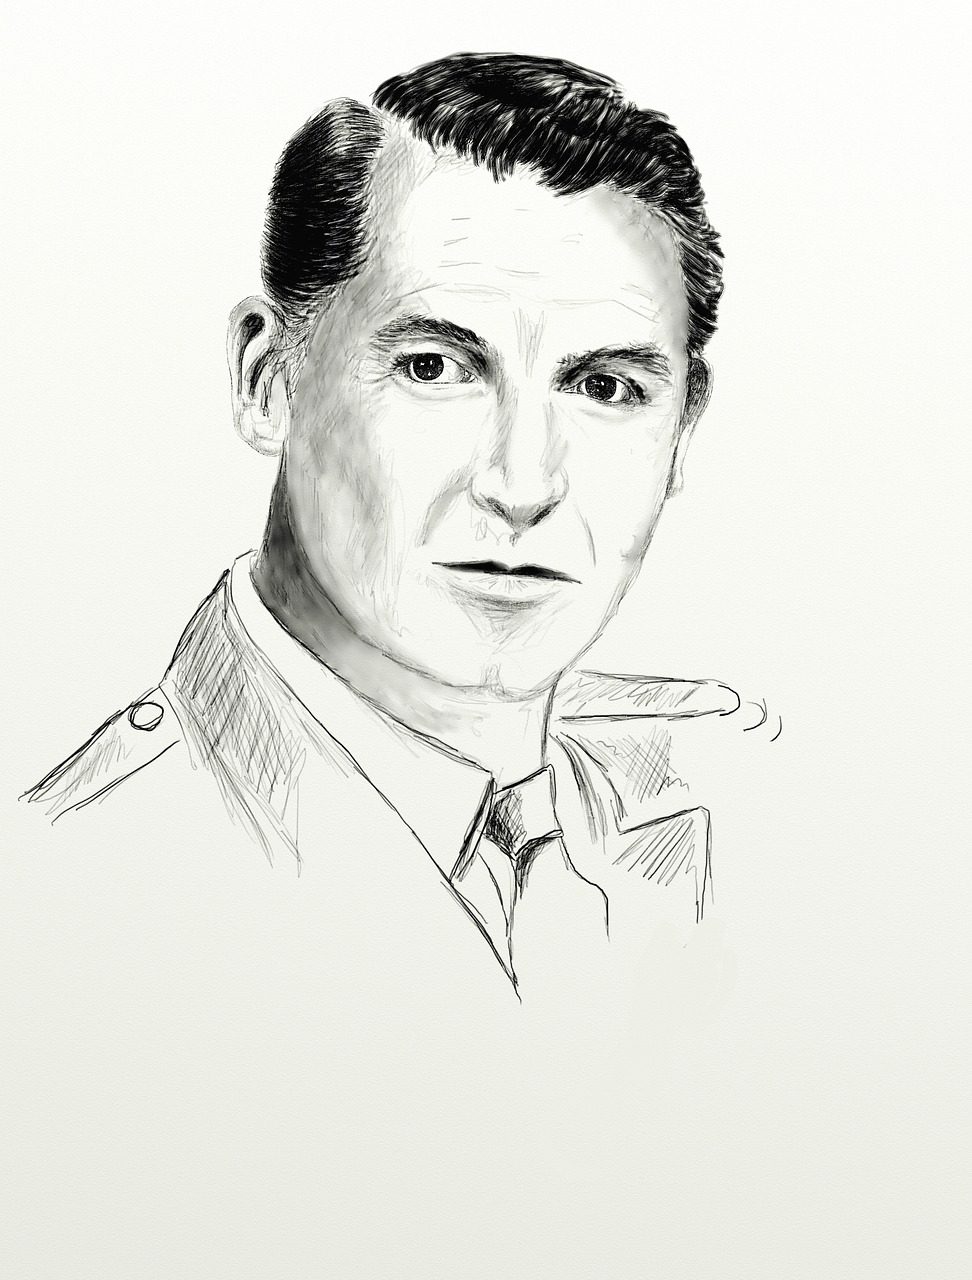 a drawing of a man in a suit and tie, digital art, by Pál Balkay, portrait of tom cruise, josip broz tito, pen and ink monochrome, pierce brosnan